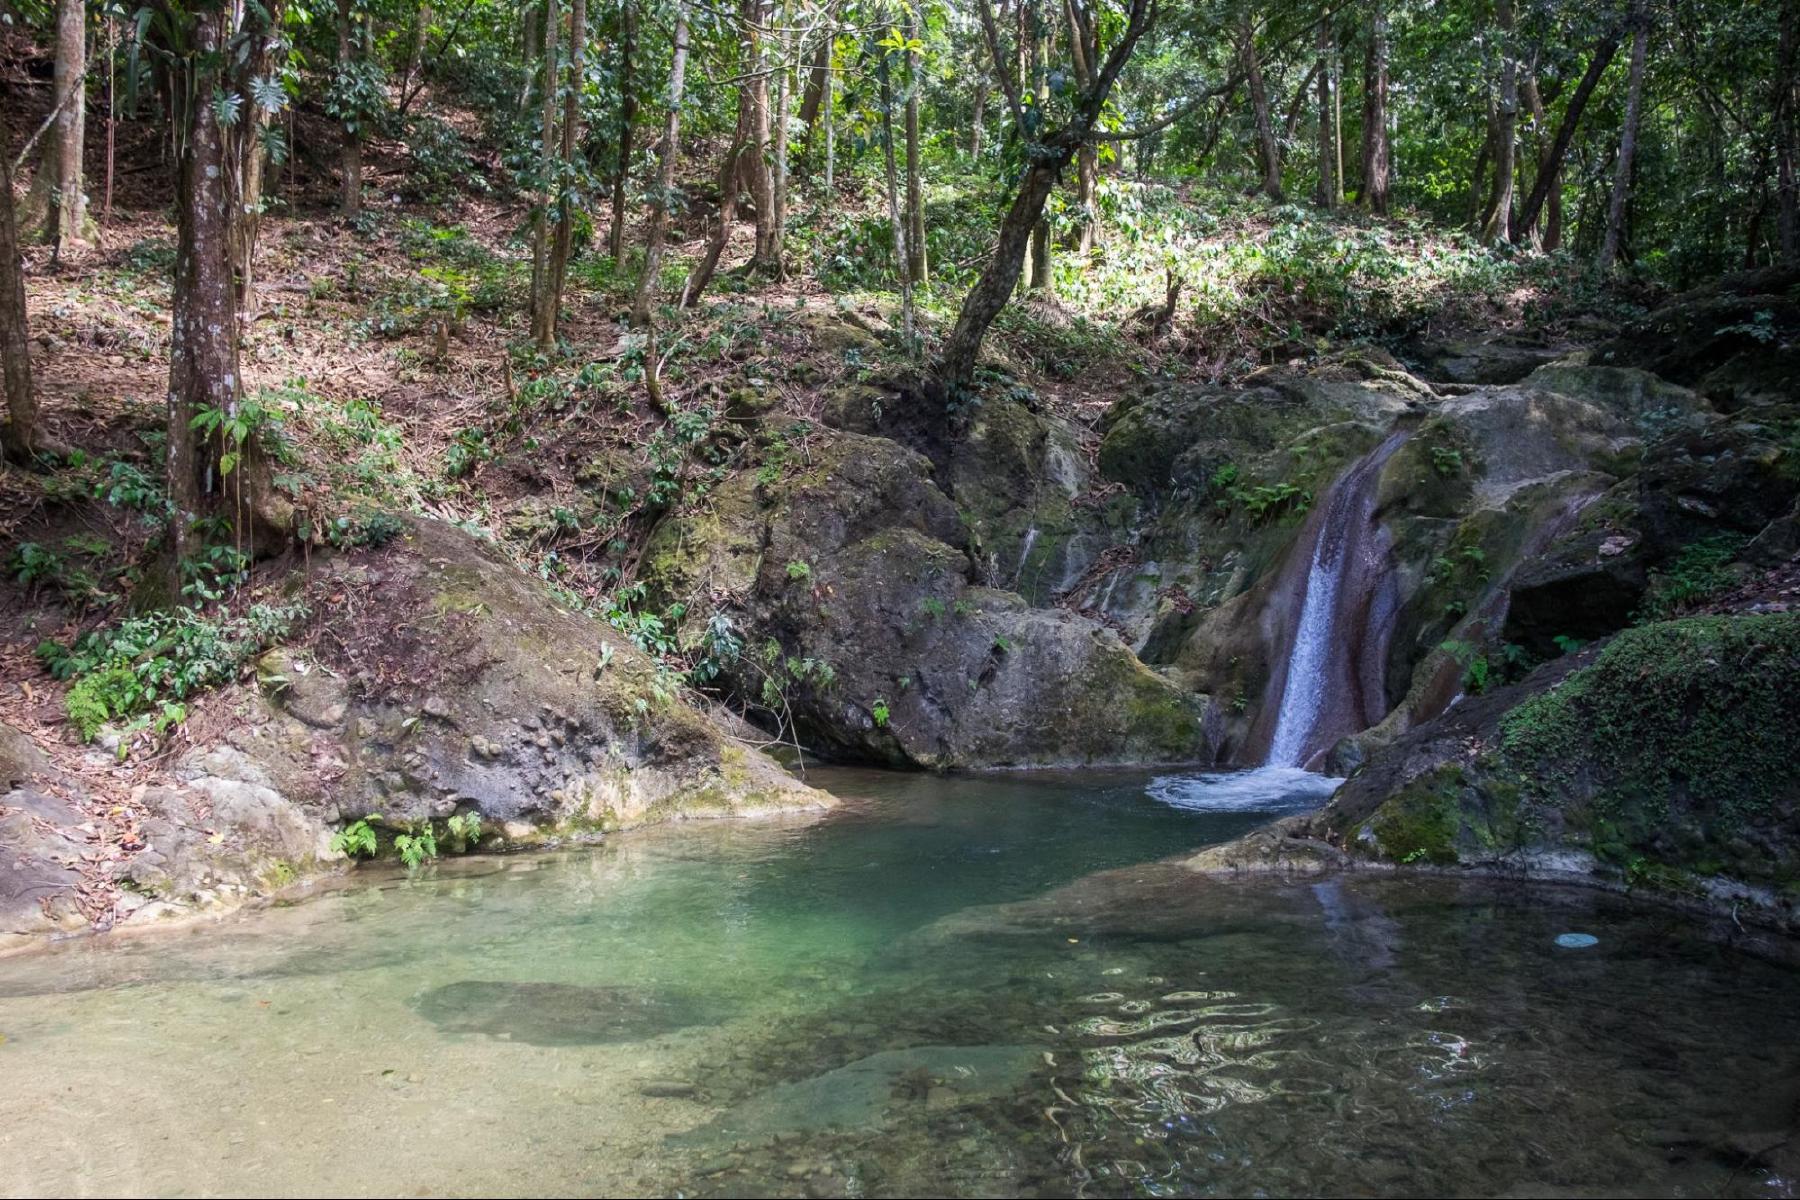 swimming hole in the rainforest, rock and a waterfall, dappled sunlight